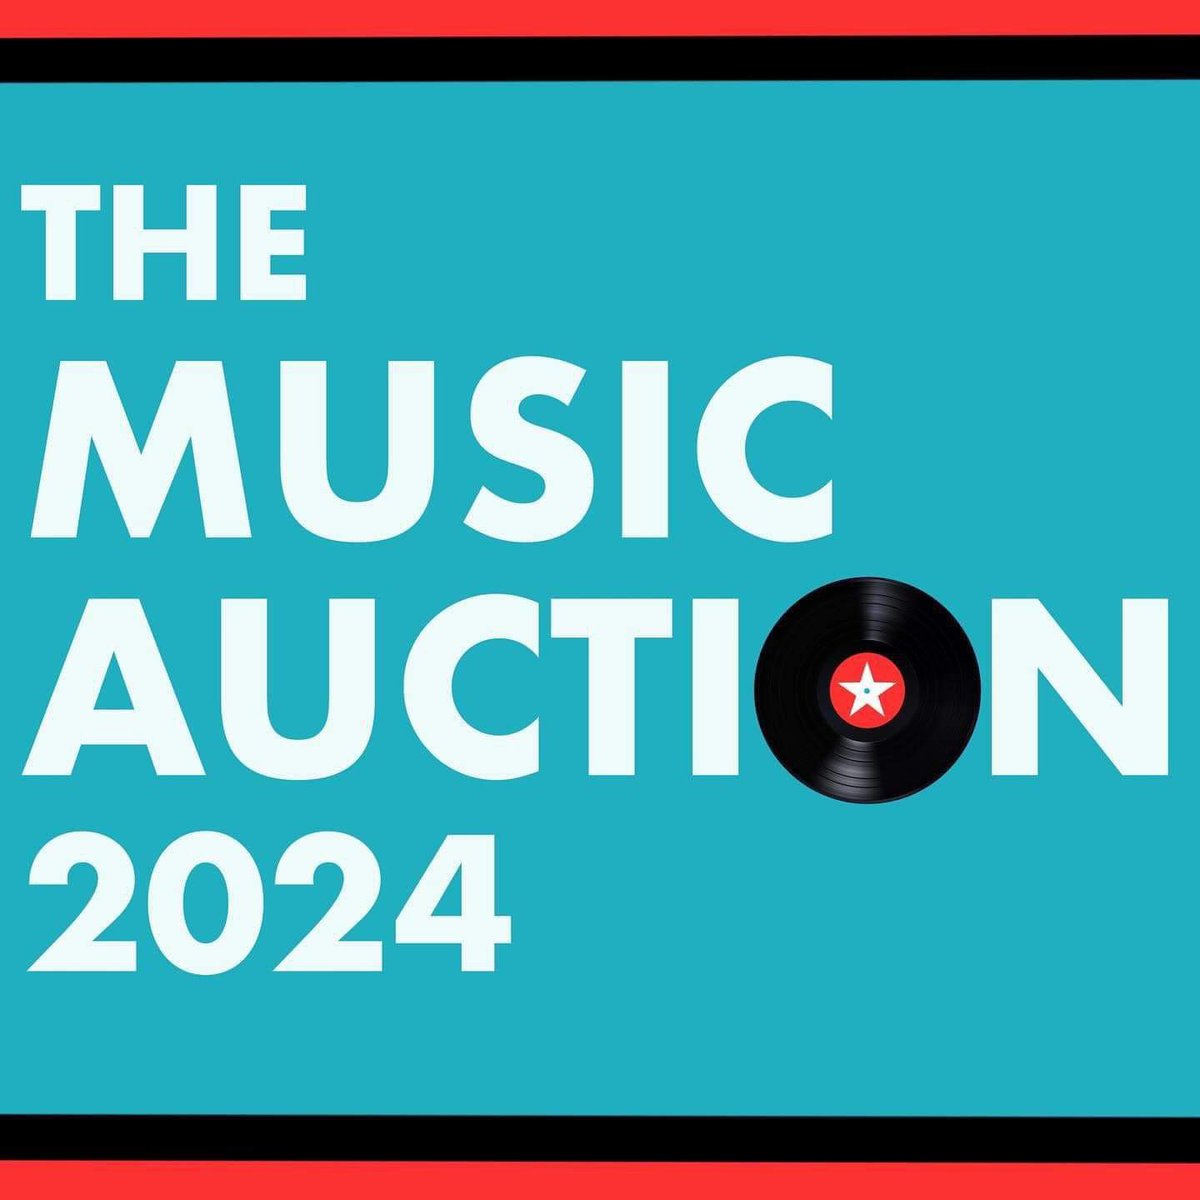 “Get down and boogie” over to the 2024 Music Auction from @davecrossx for @cabaretvscancer

ENDS 7.30pm TODAY!

jumblebee.co.uk/music24

❤️Autographs
Vinyl 🎧
🎤 Rare
And lots more 🎶

#charity #KateBush #rare #kimwilde #recordcollector #blondie #musicfan #kylie #softcell